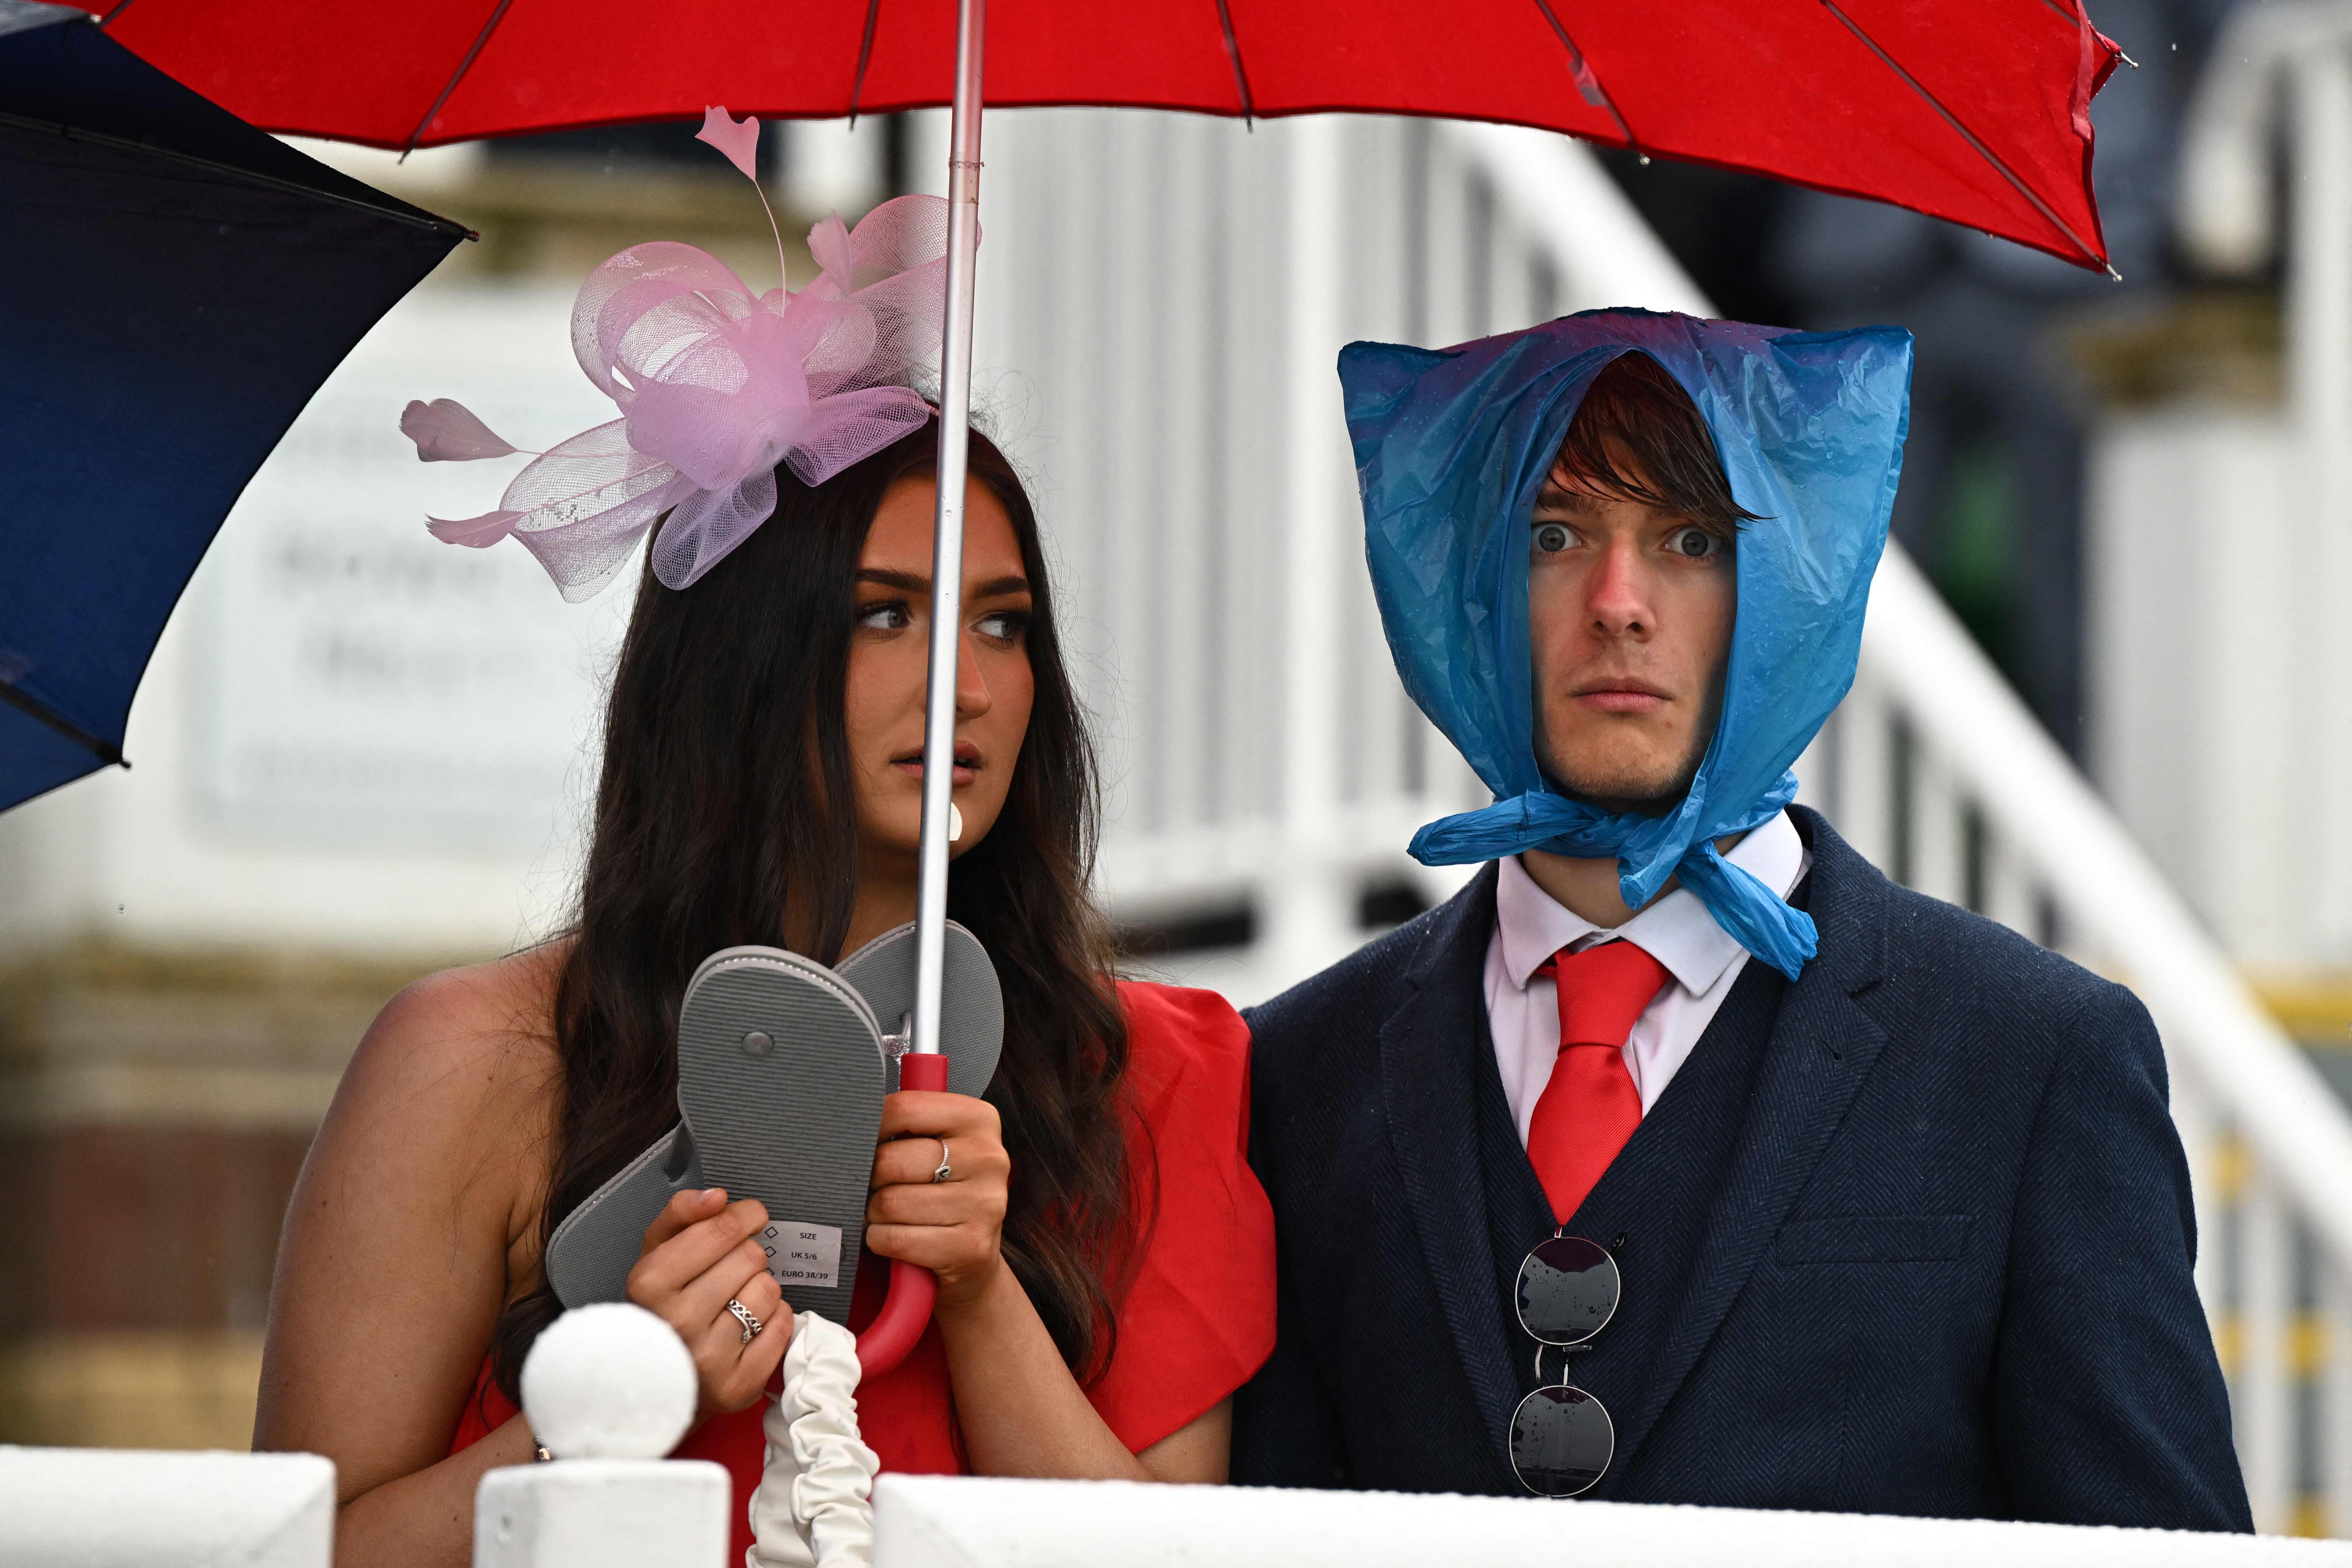 Racegoers shelter from the rain as they attend on the second day of the Grand National Festival horse race meeting at Aintree Racecourse in Liverpool, north-west England